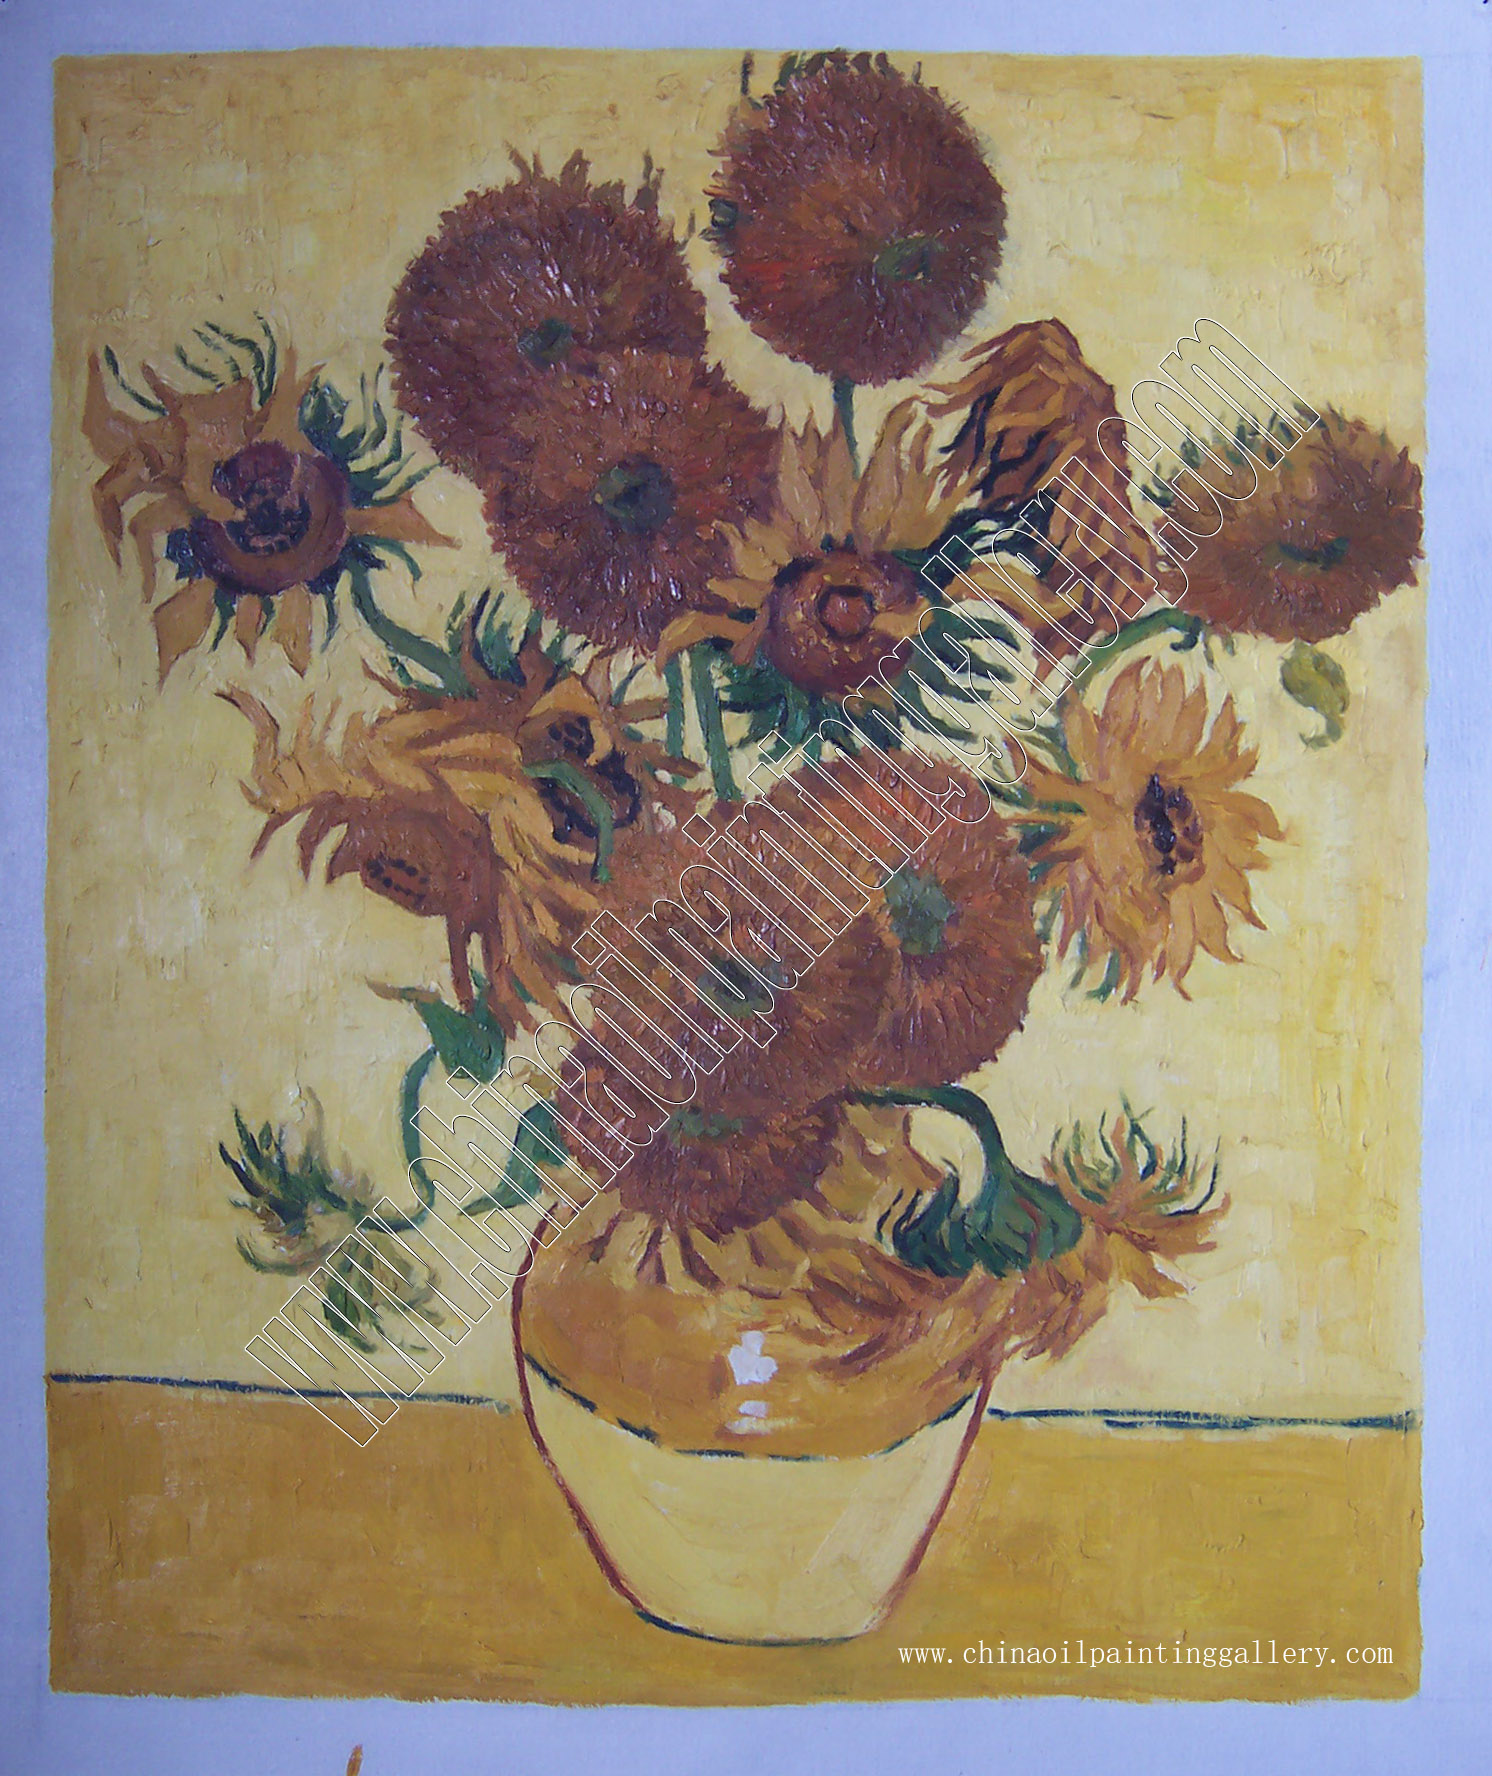 Vincent van Gogh Sunflowers - Oil painting reproductions 6